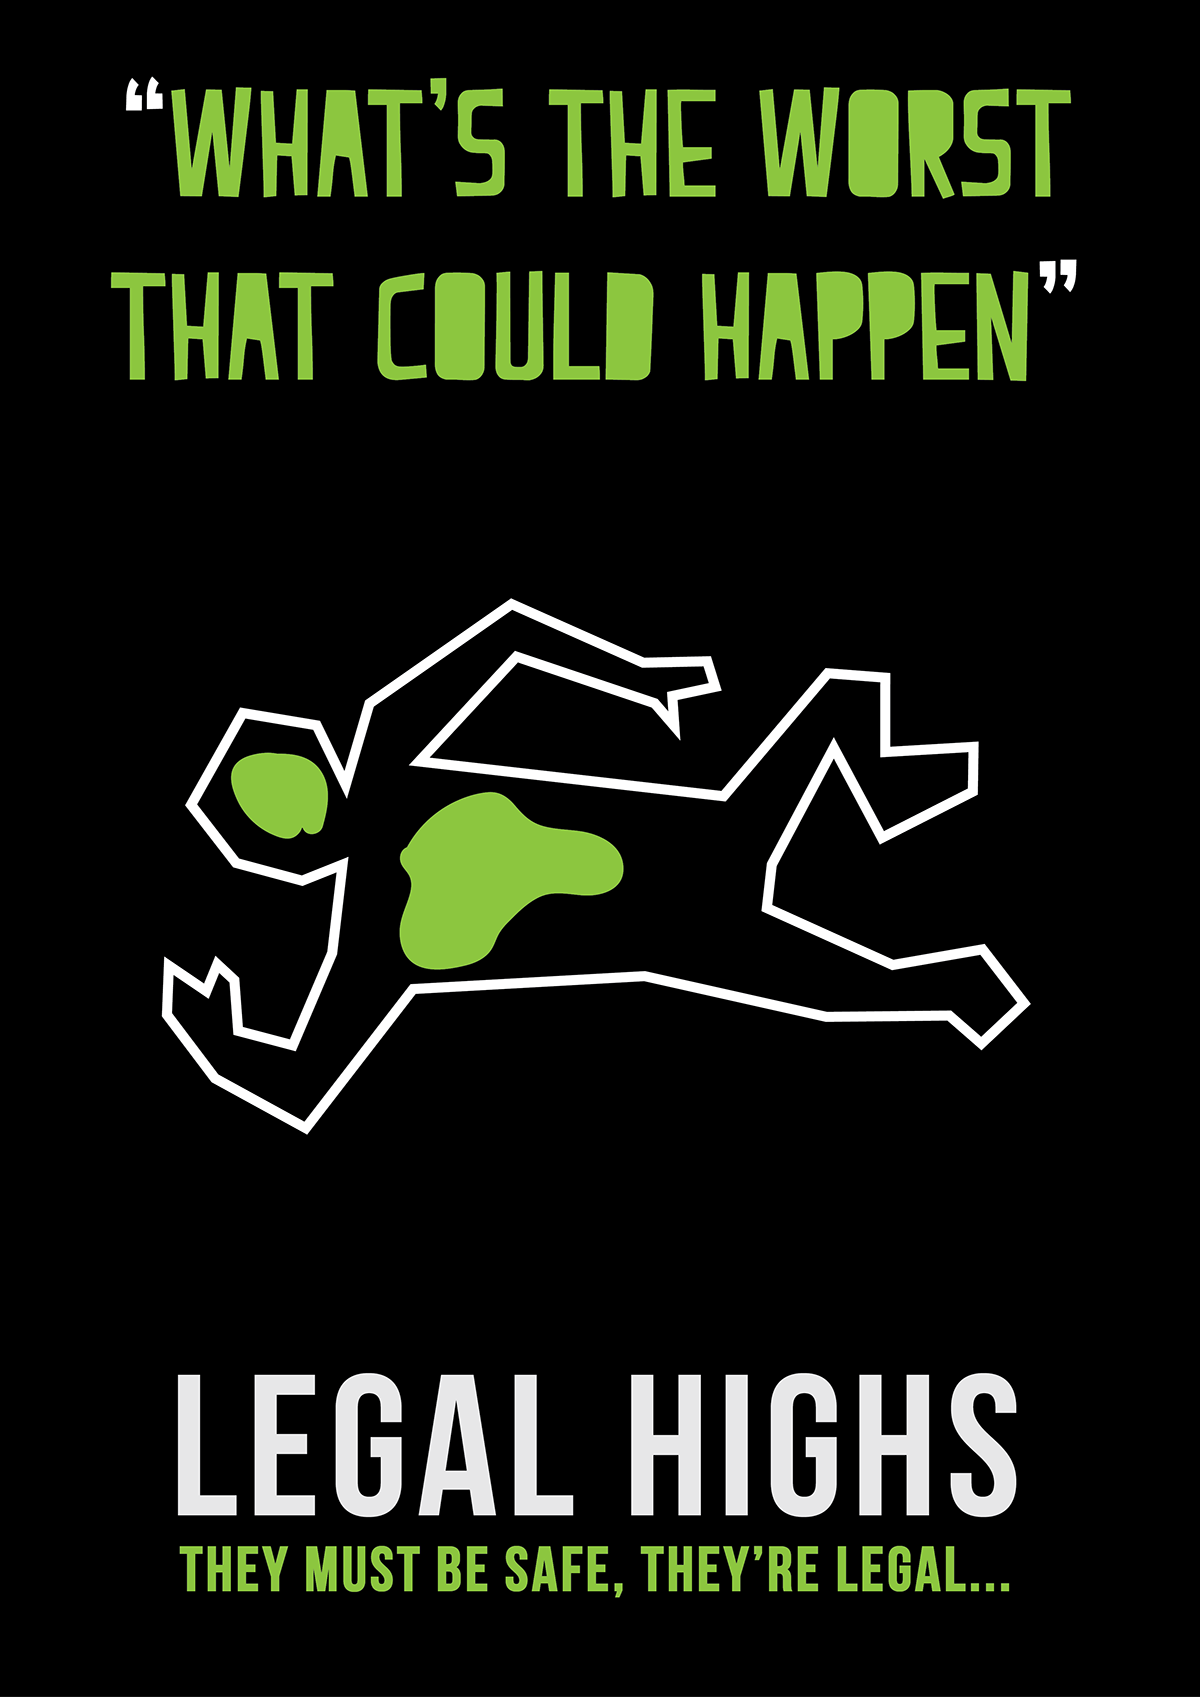 Legal Highs awareness design competition